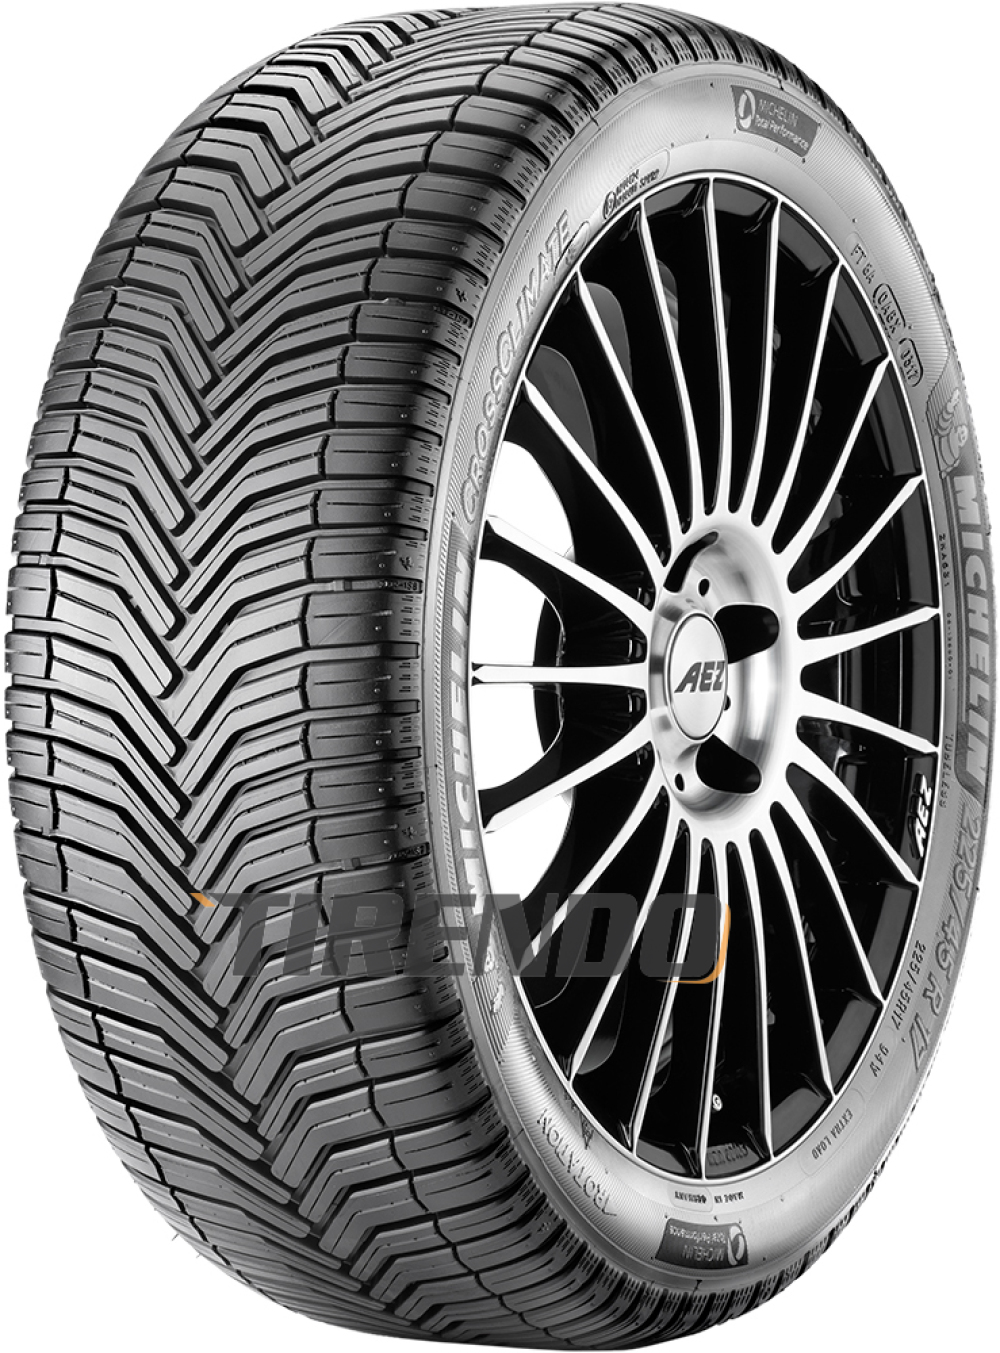 Image of Michelin CrossClimate ( 205/60 R16 96V XL )